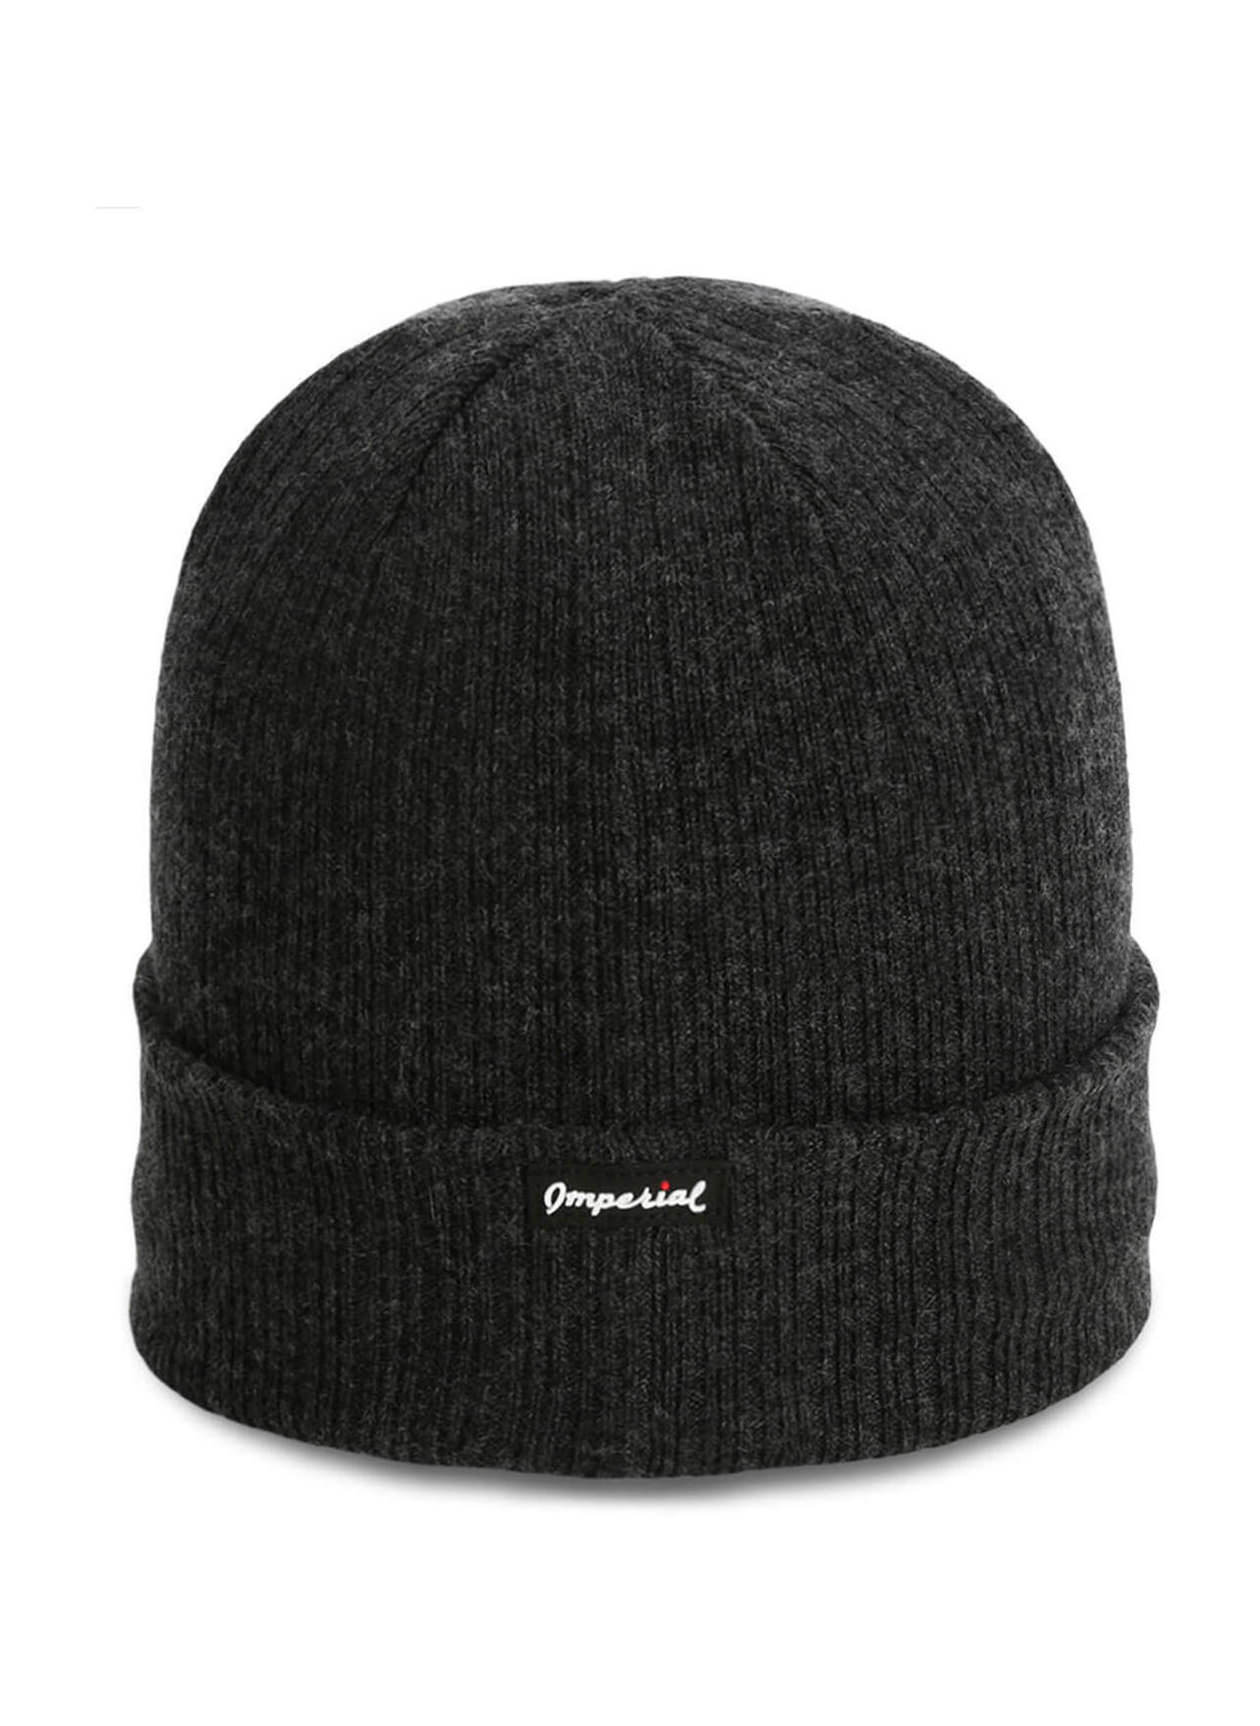 Imperial Shadow The Edelweiss Cashmere and Wool Knit Beanie